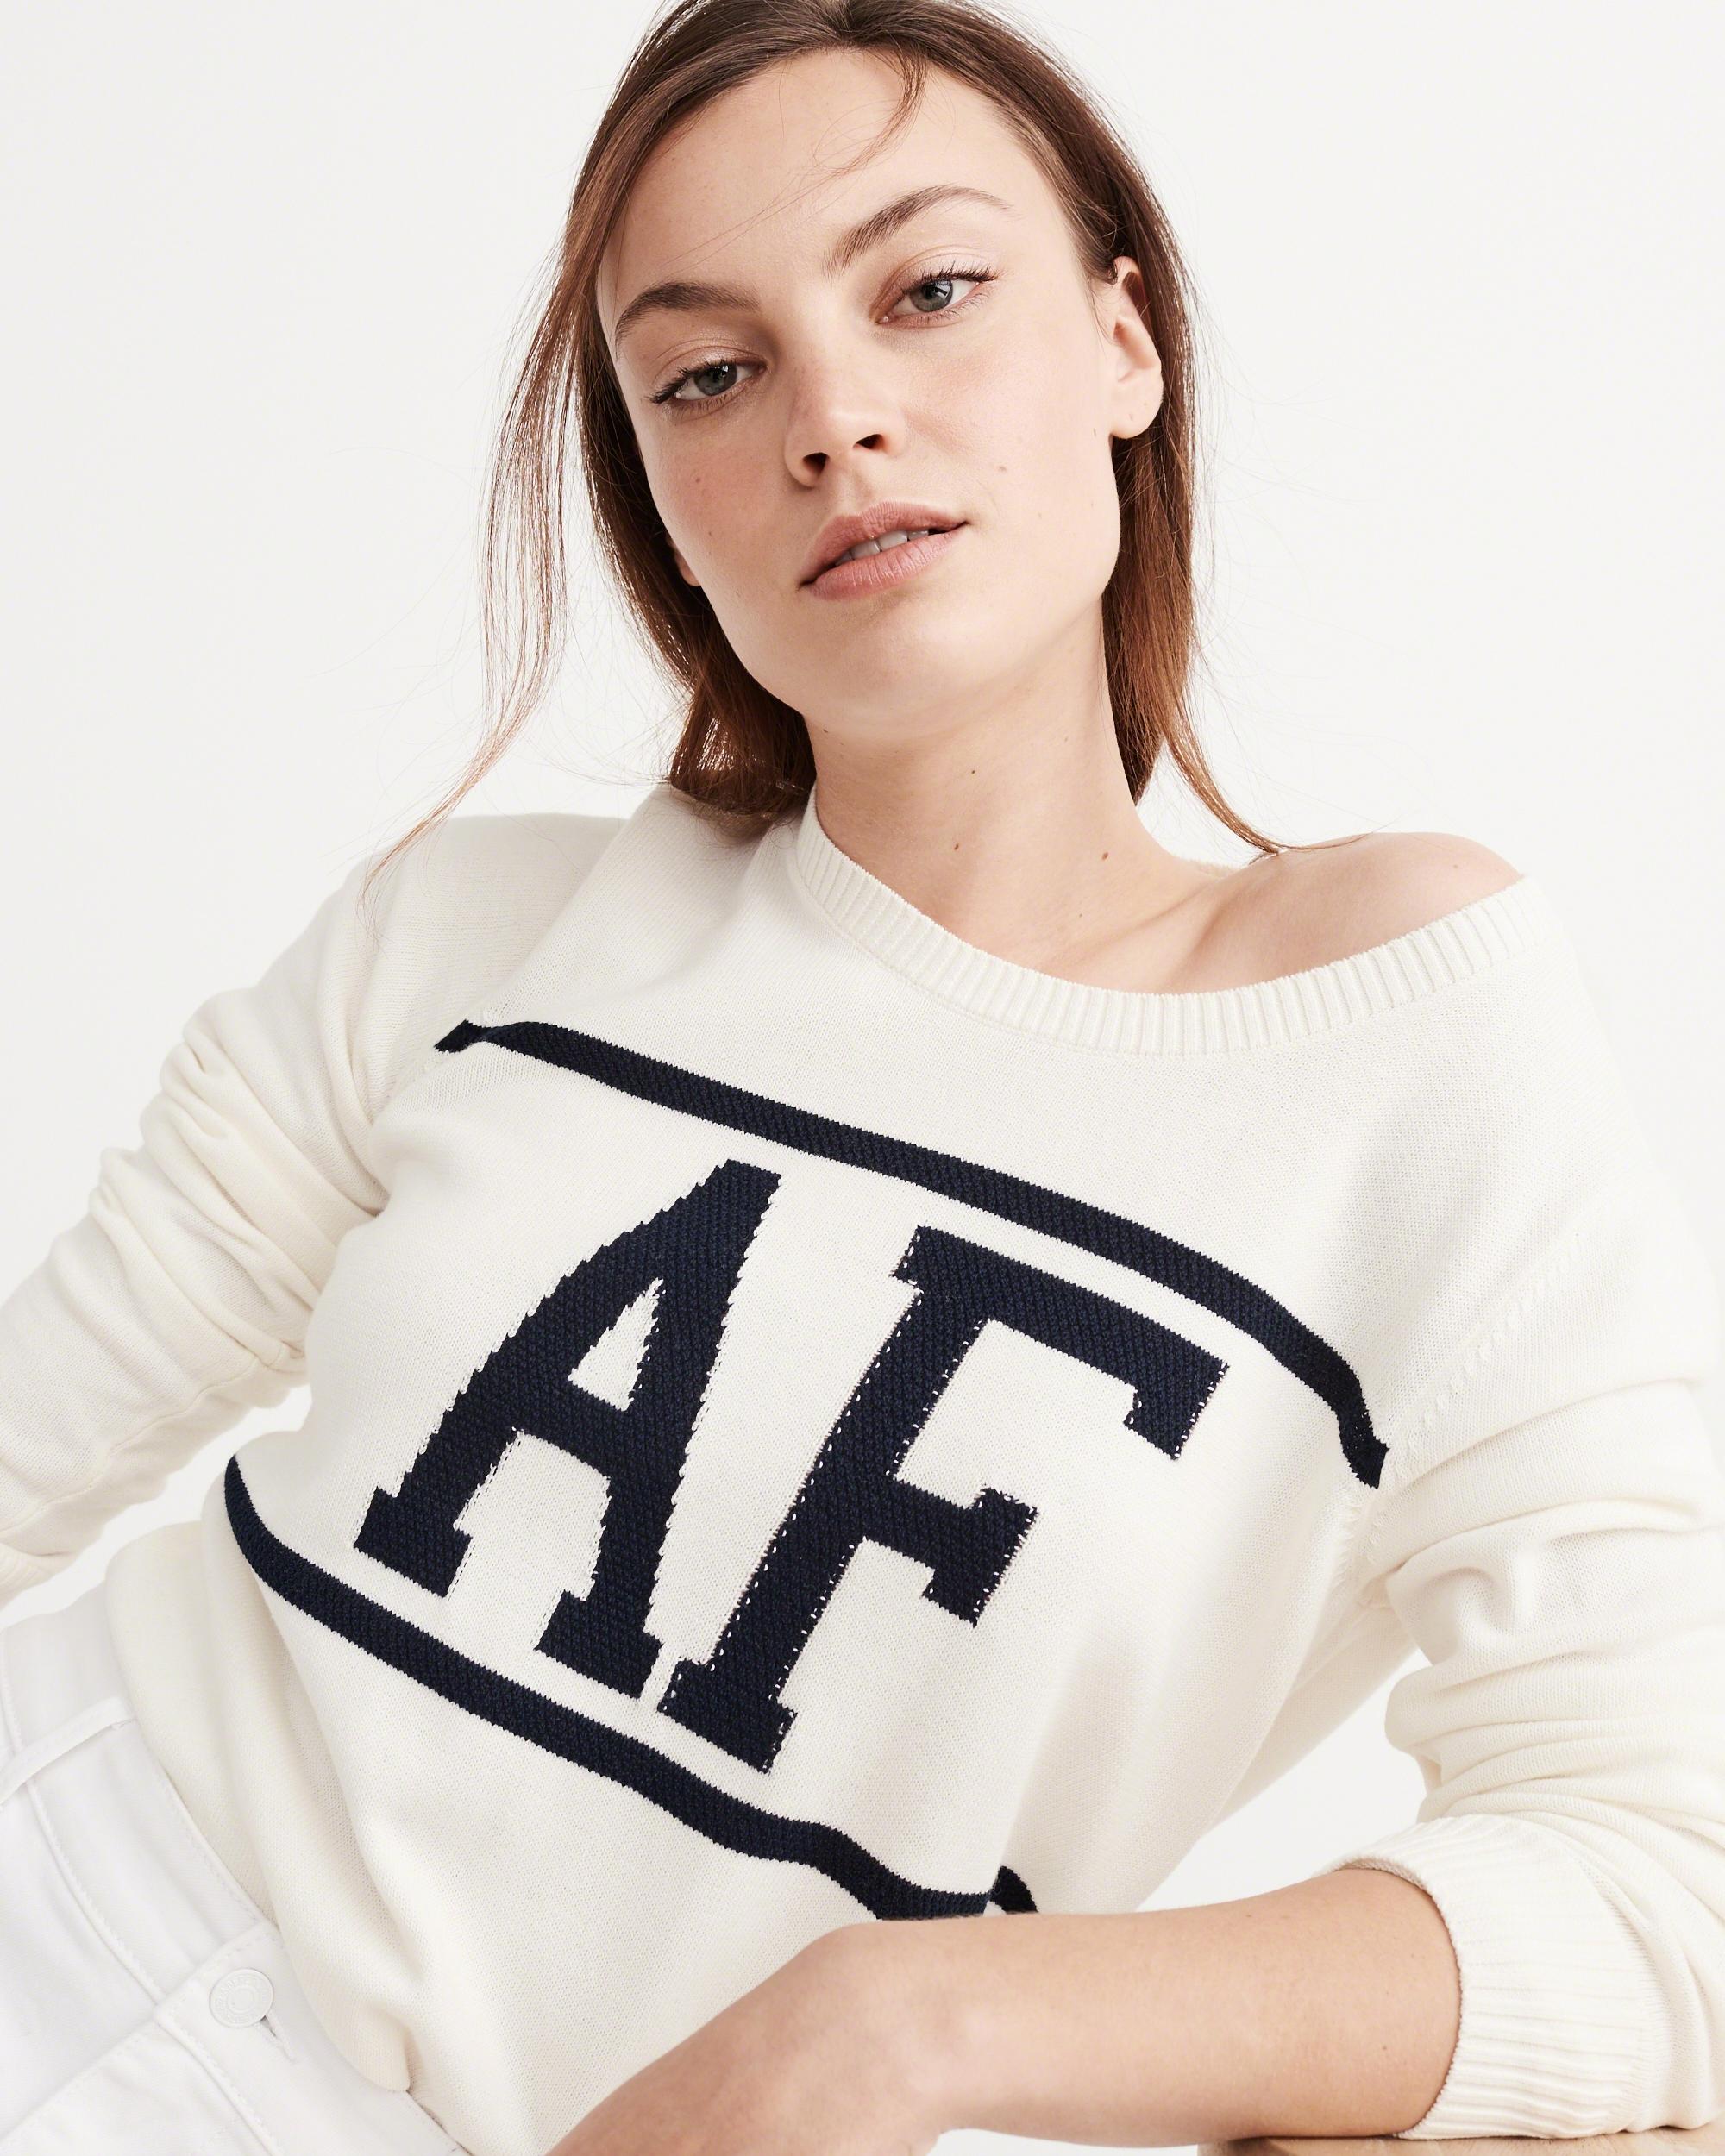 Lyst - Abercrombie & Fitch Logo Crew Sweater in White